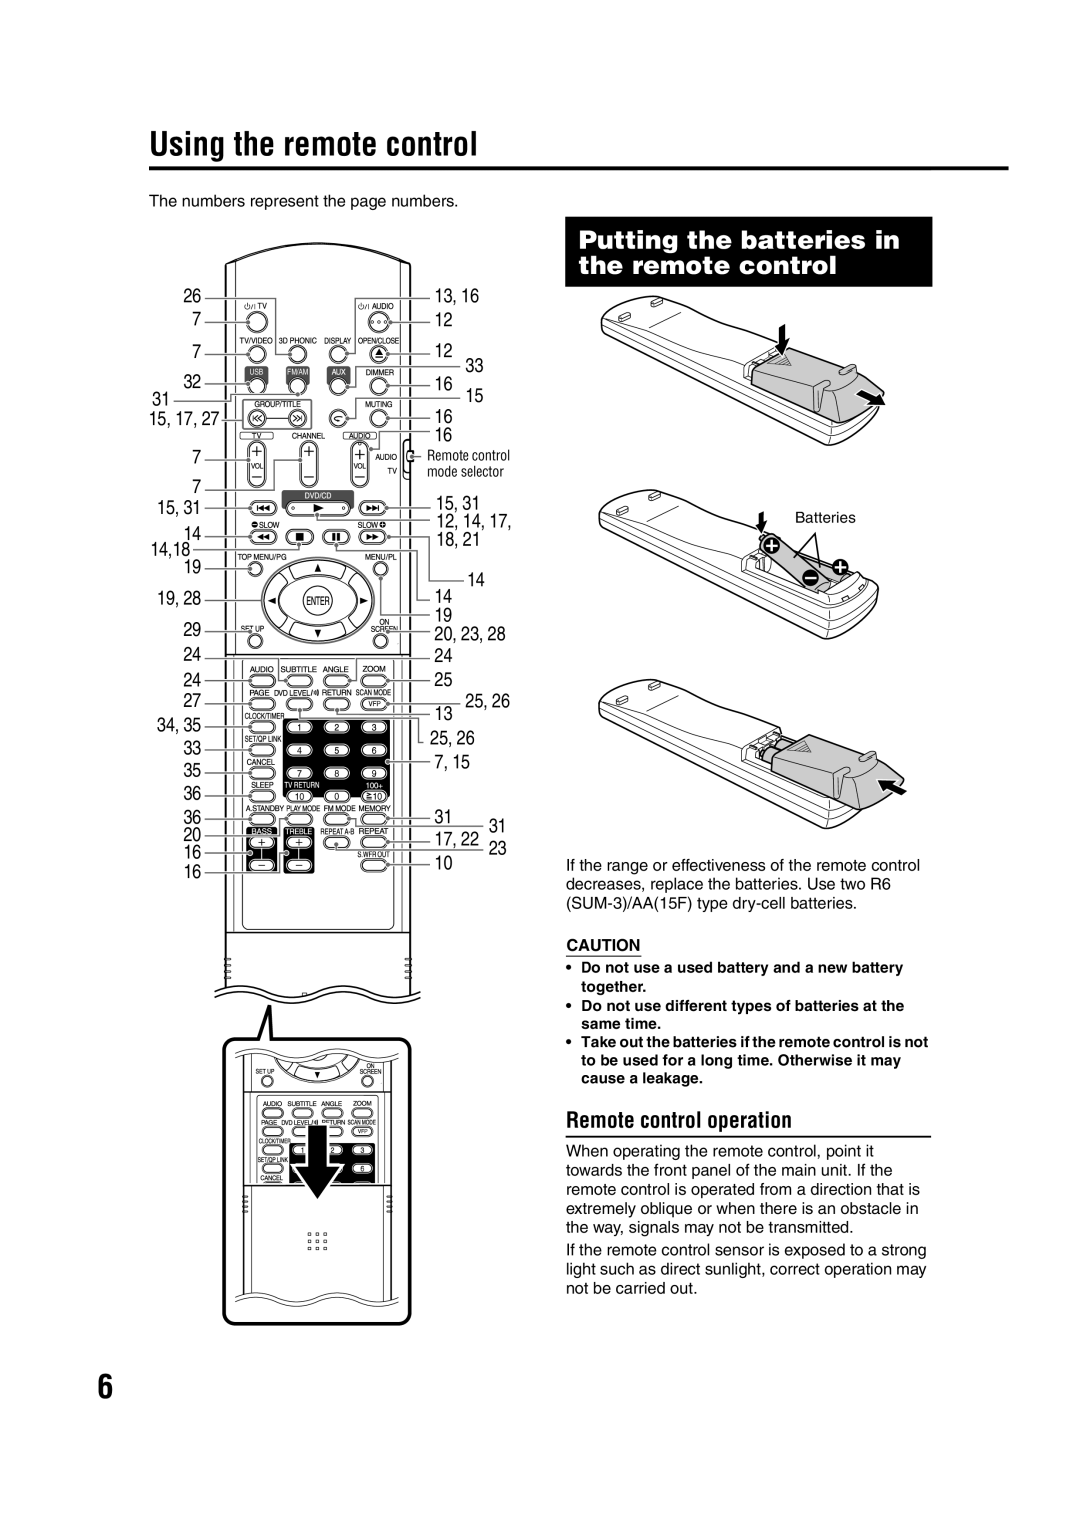 JVC GNT0066-001A manual Using the remote control, Putting the batteries in the remote control, Remote control operation 